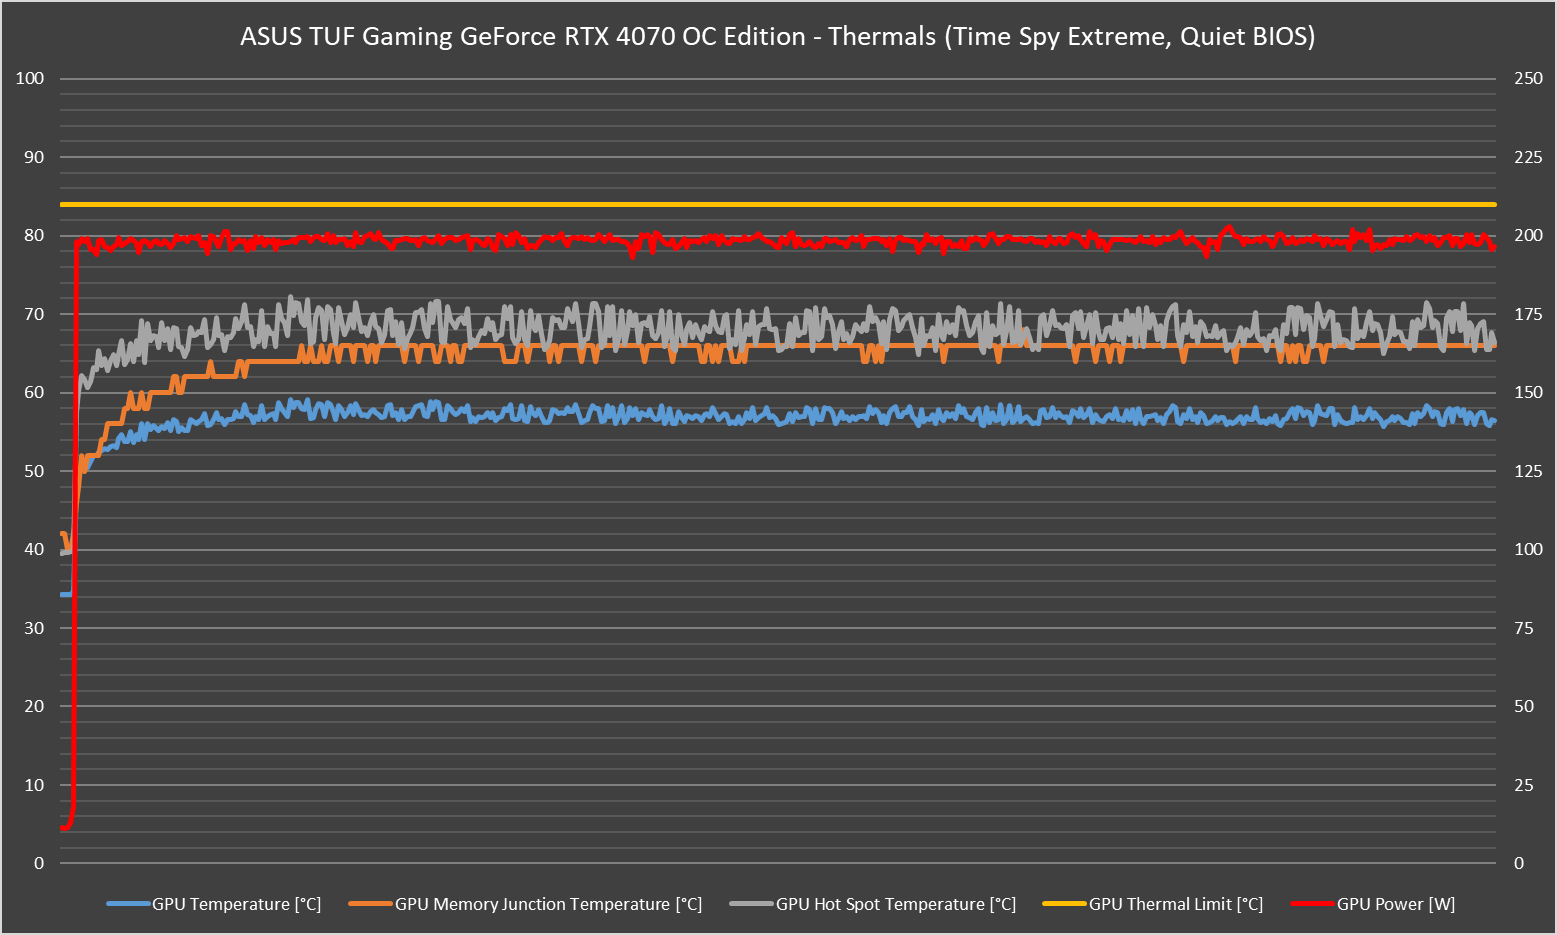 ASUS TUF Gaming GeForce RTX 4070 OC Edition Review - Solid And Silent 50